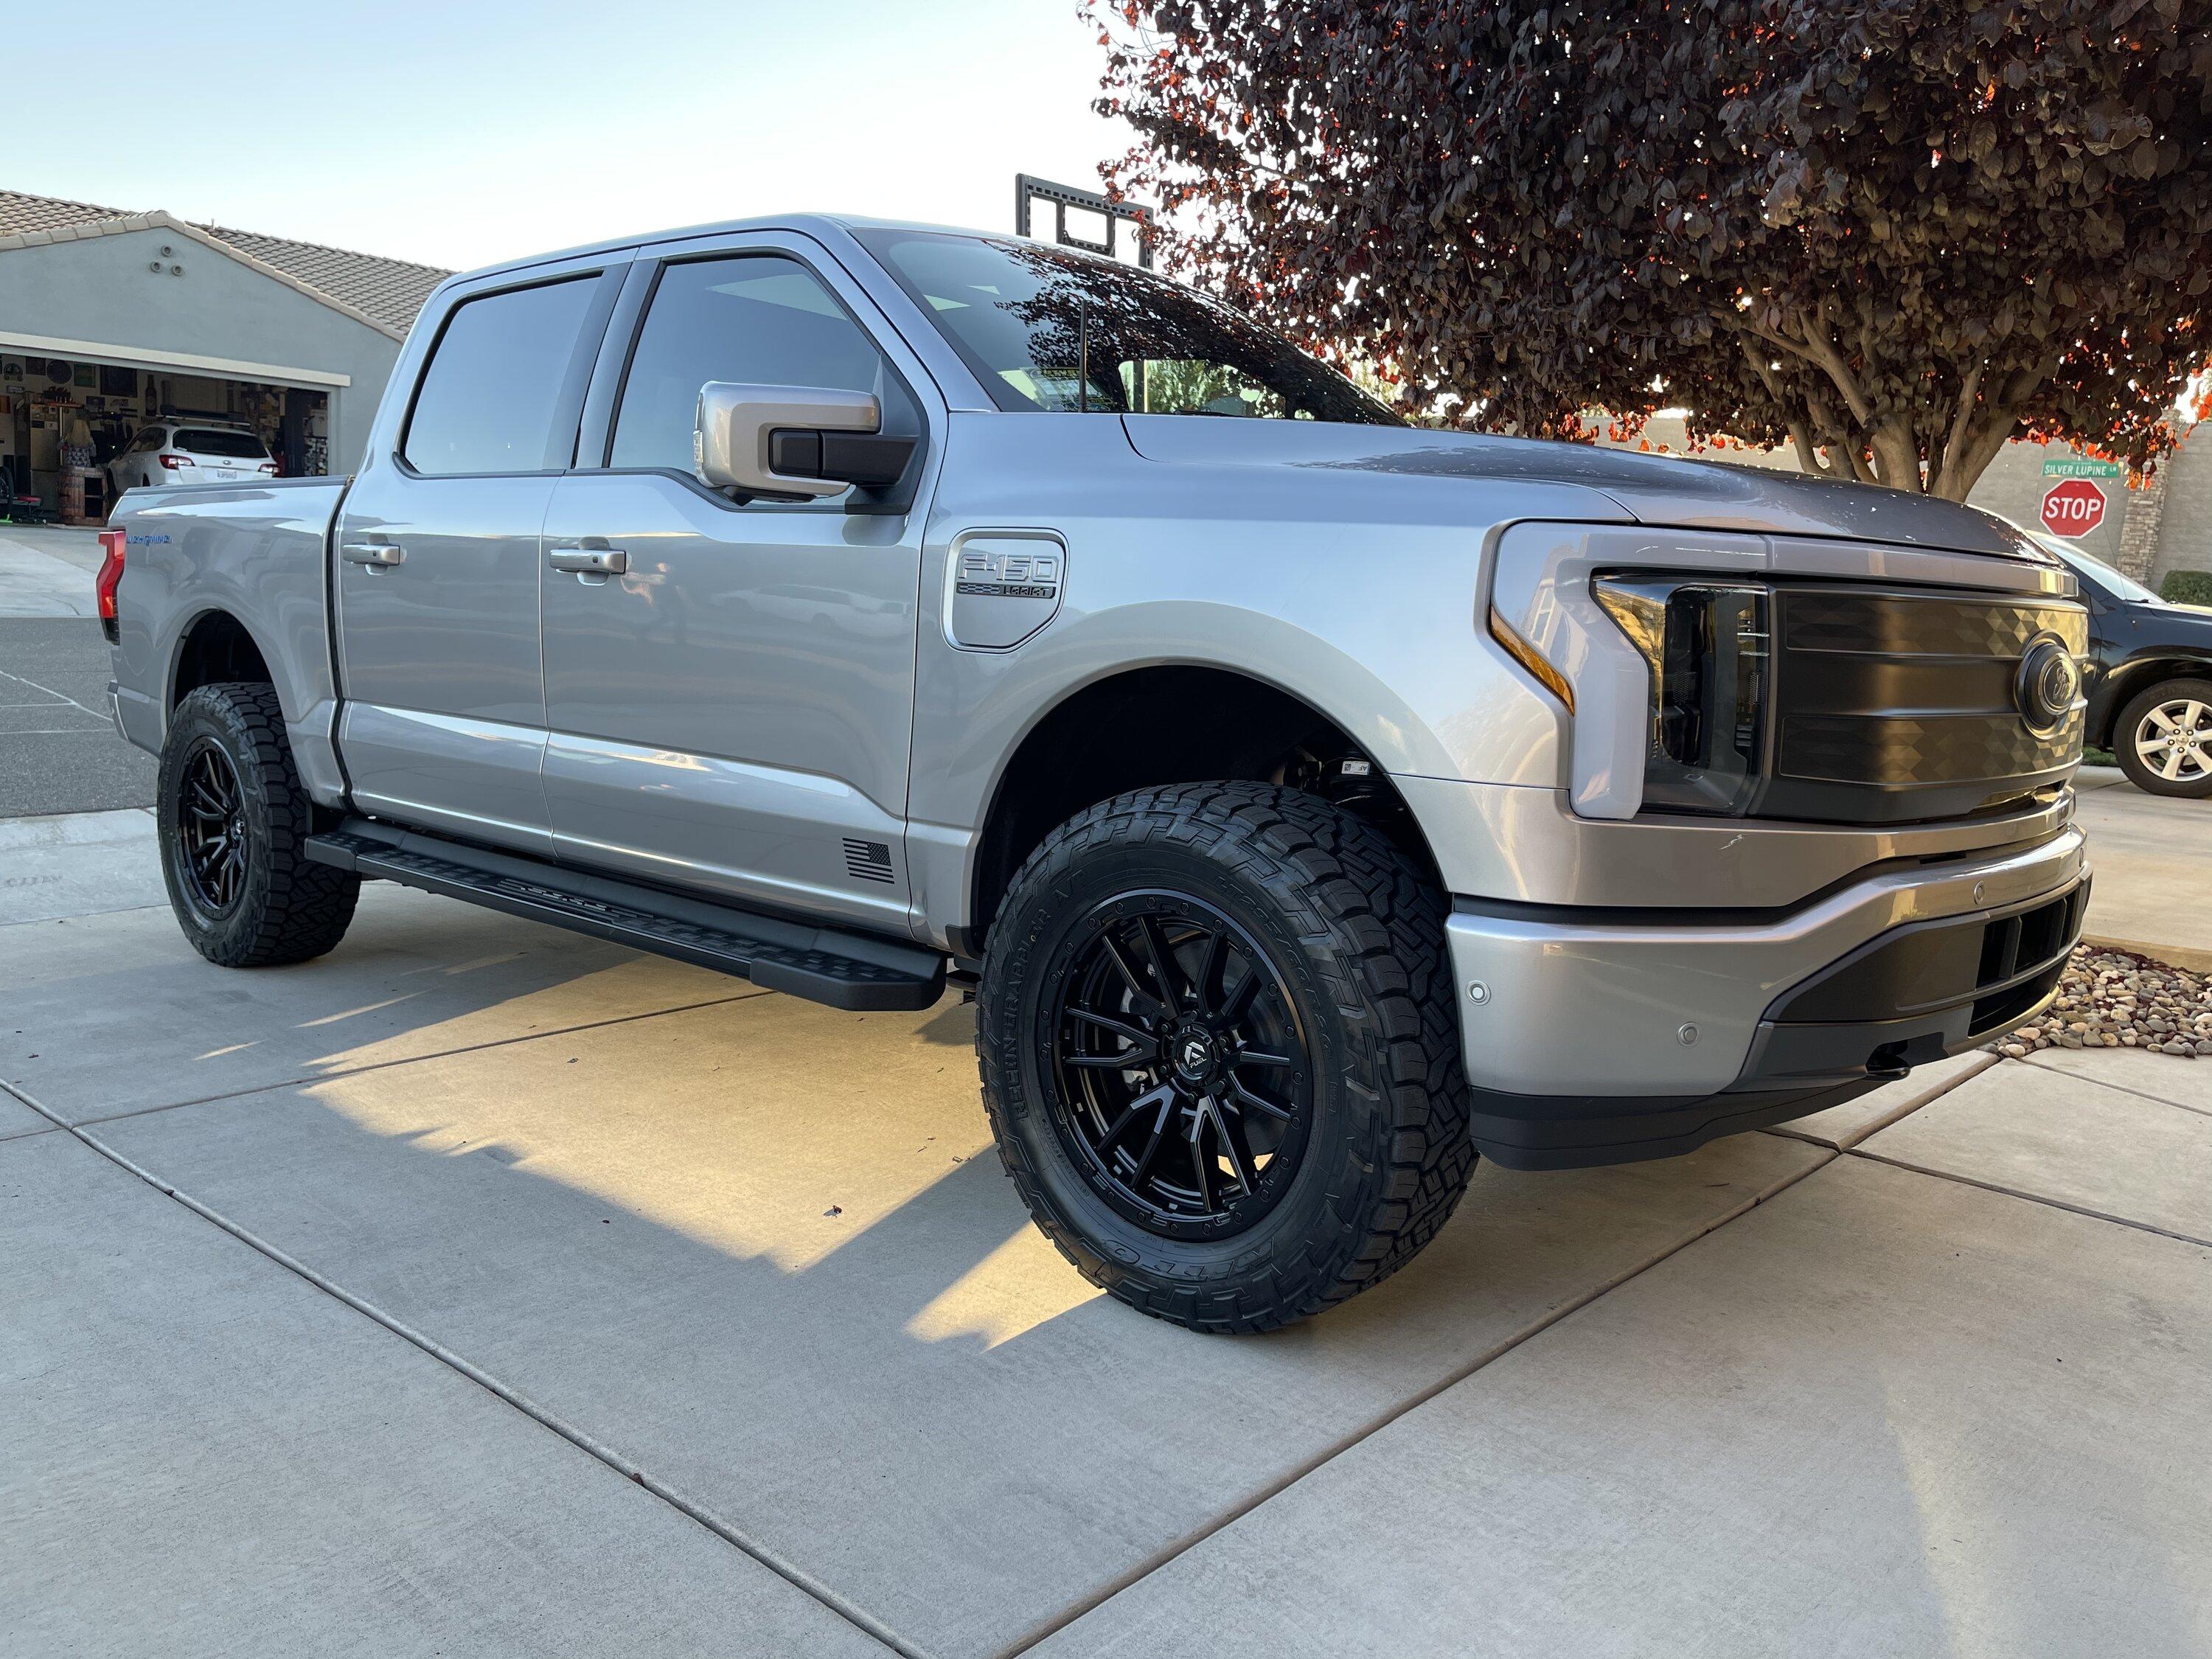 Ford F-150 Lightning ReadyLift 2" level, Fuel Rebel 20x9 (et +1), and Nitto Recon Grappler 295/60r20 190BC47E-2FB8-4FED-A6ED-E77A9041310B